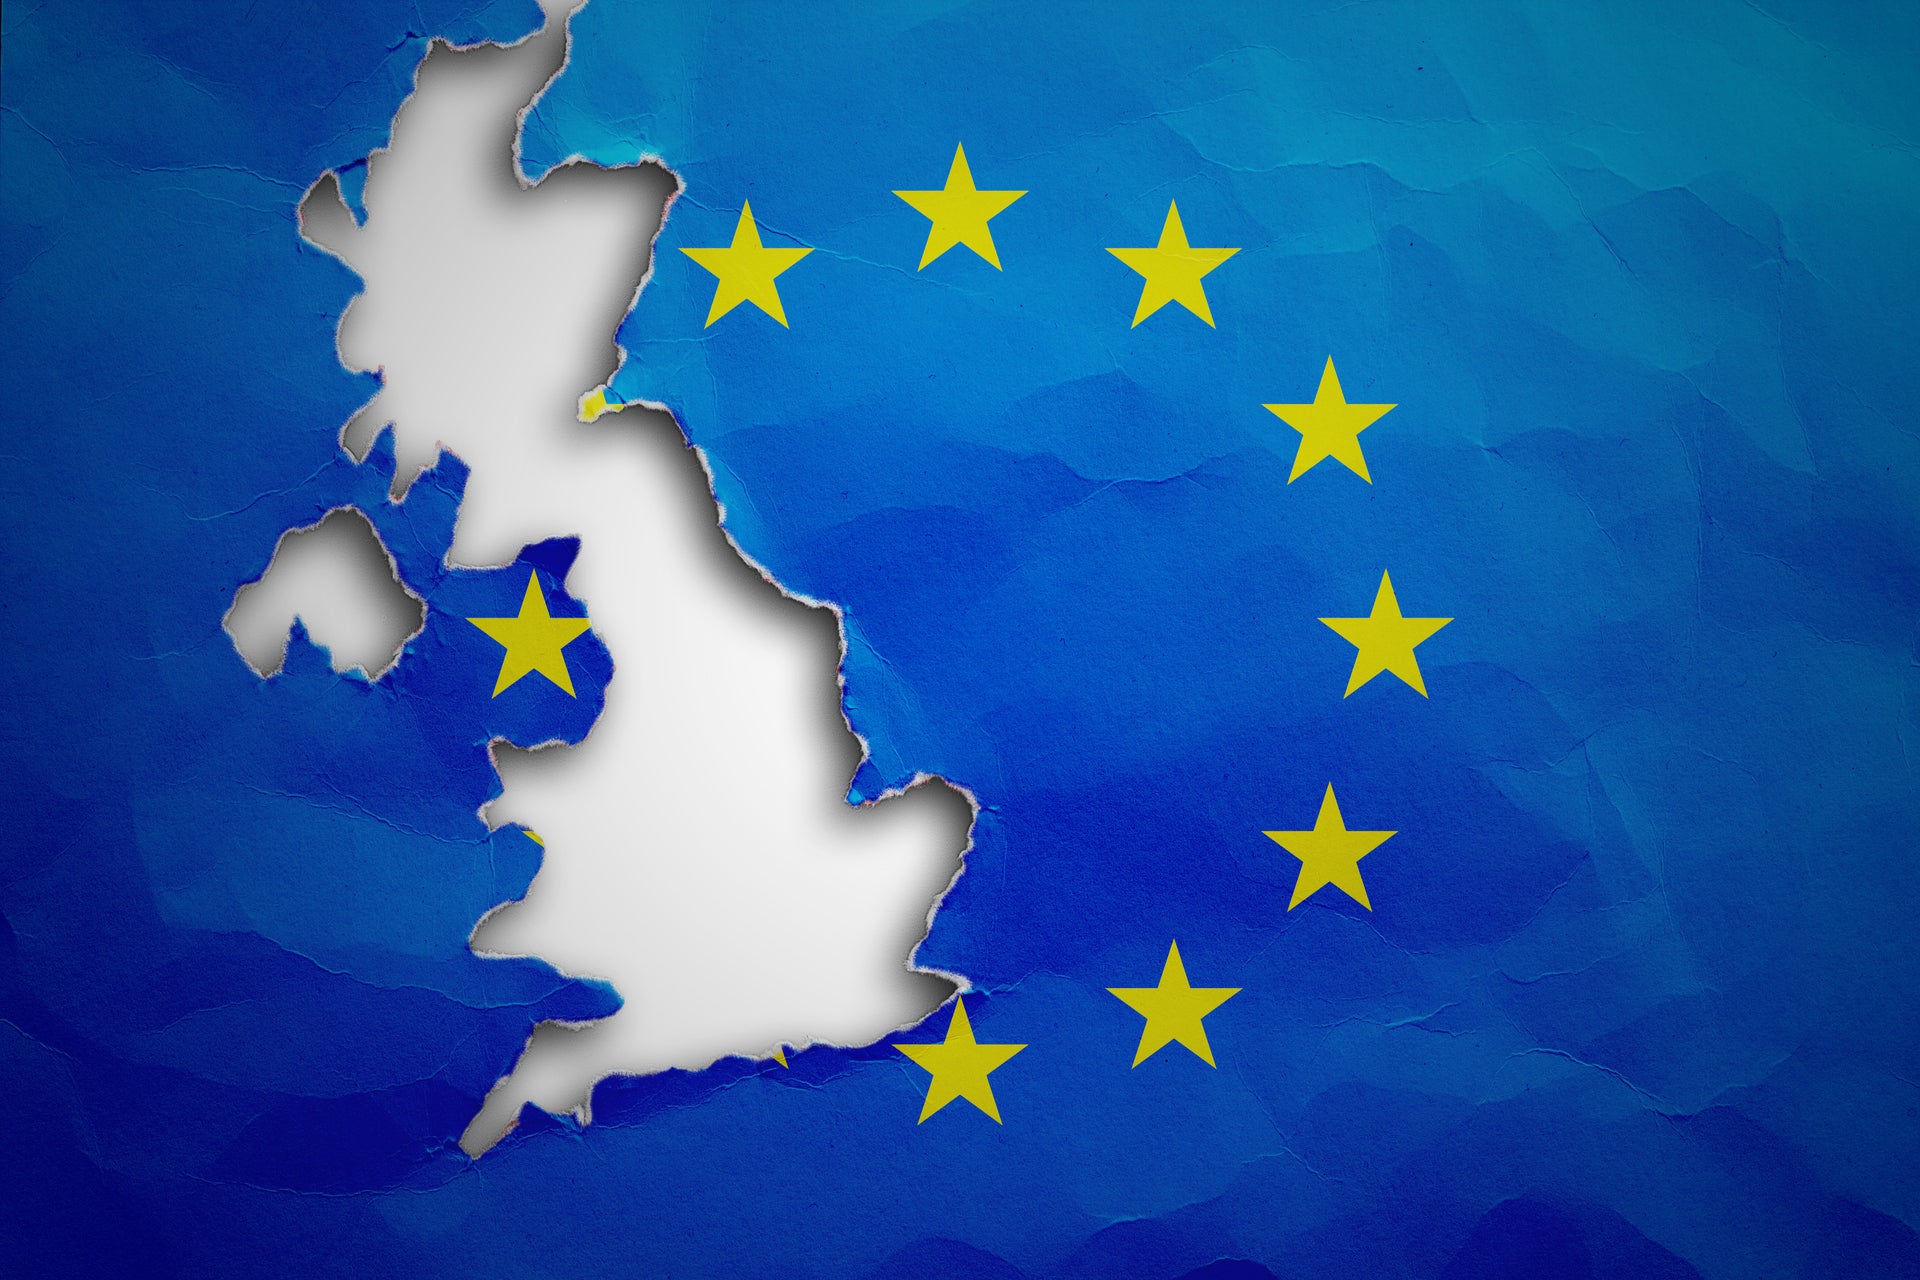 Tech industry reacts to Brexit latest: ‘Give us certainty’